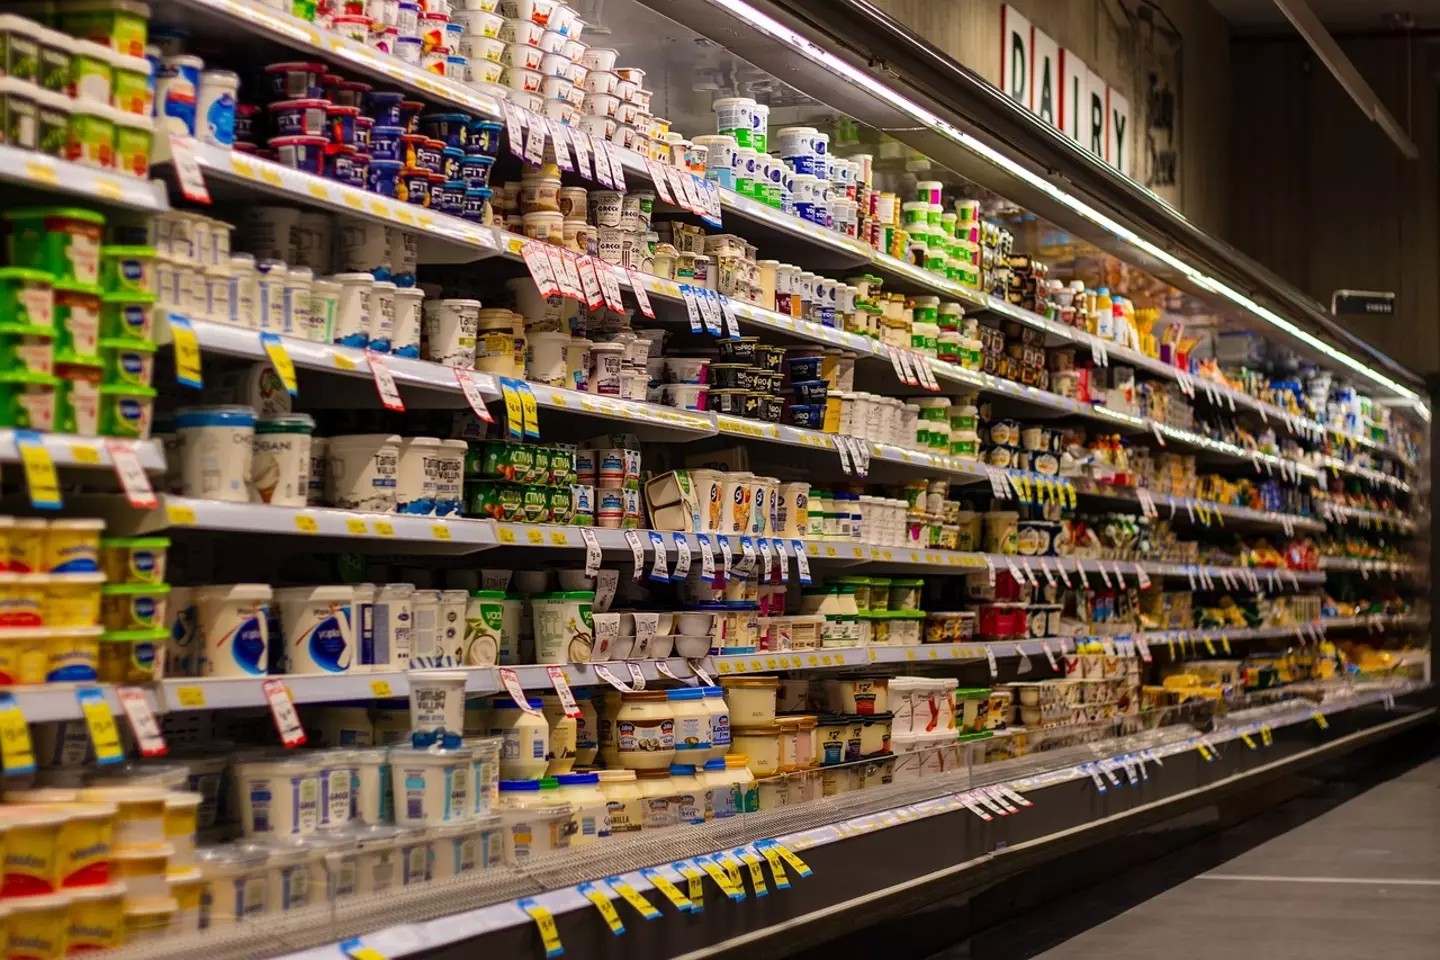 There's an 'unspoken rule' in the supermarket and people have very different opinions on it.